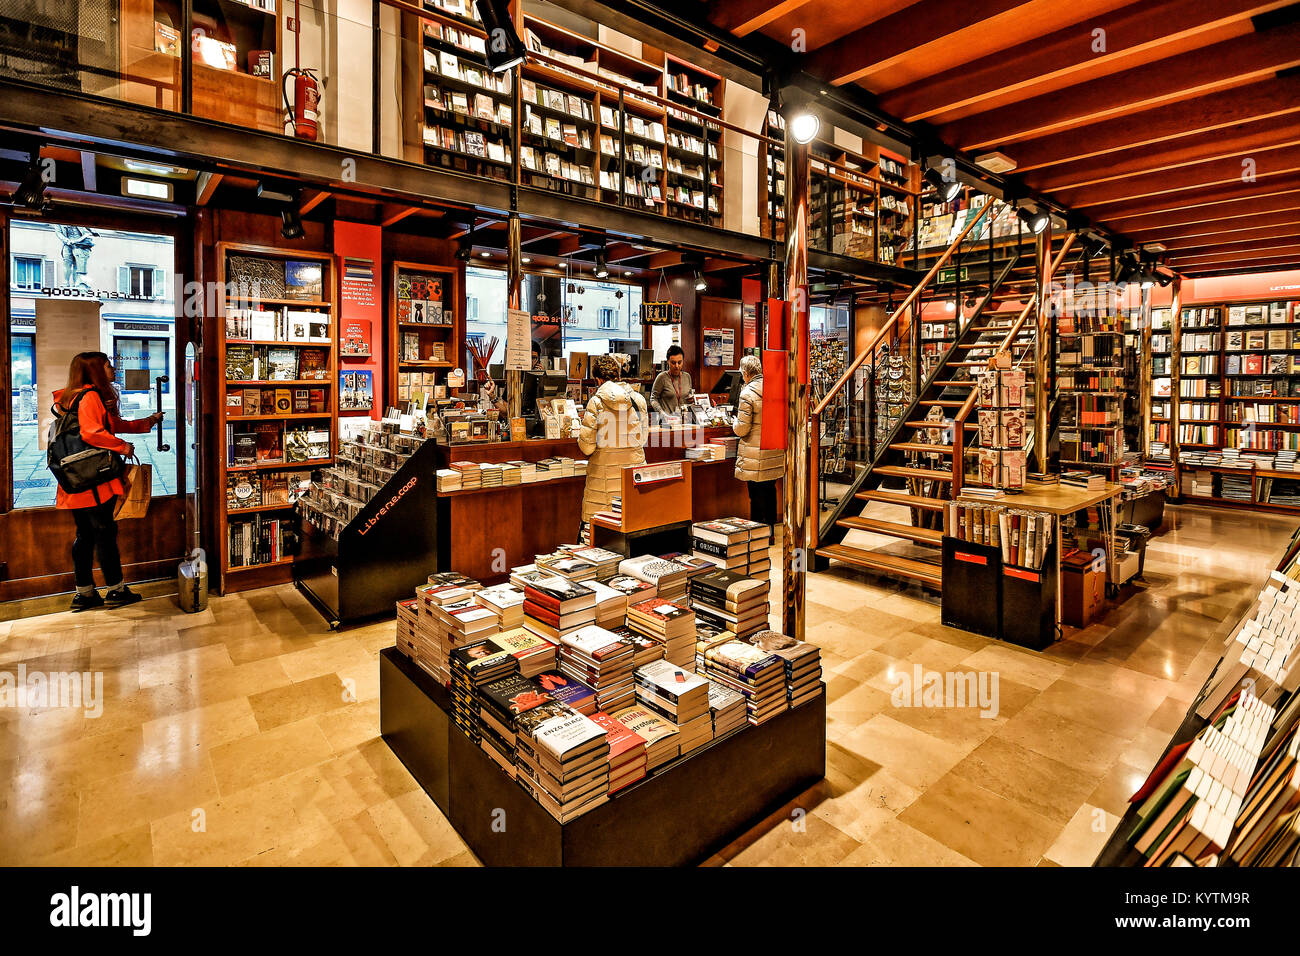 Libreria Storica High Resolution Stock Photography and Images - Alamy